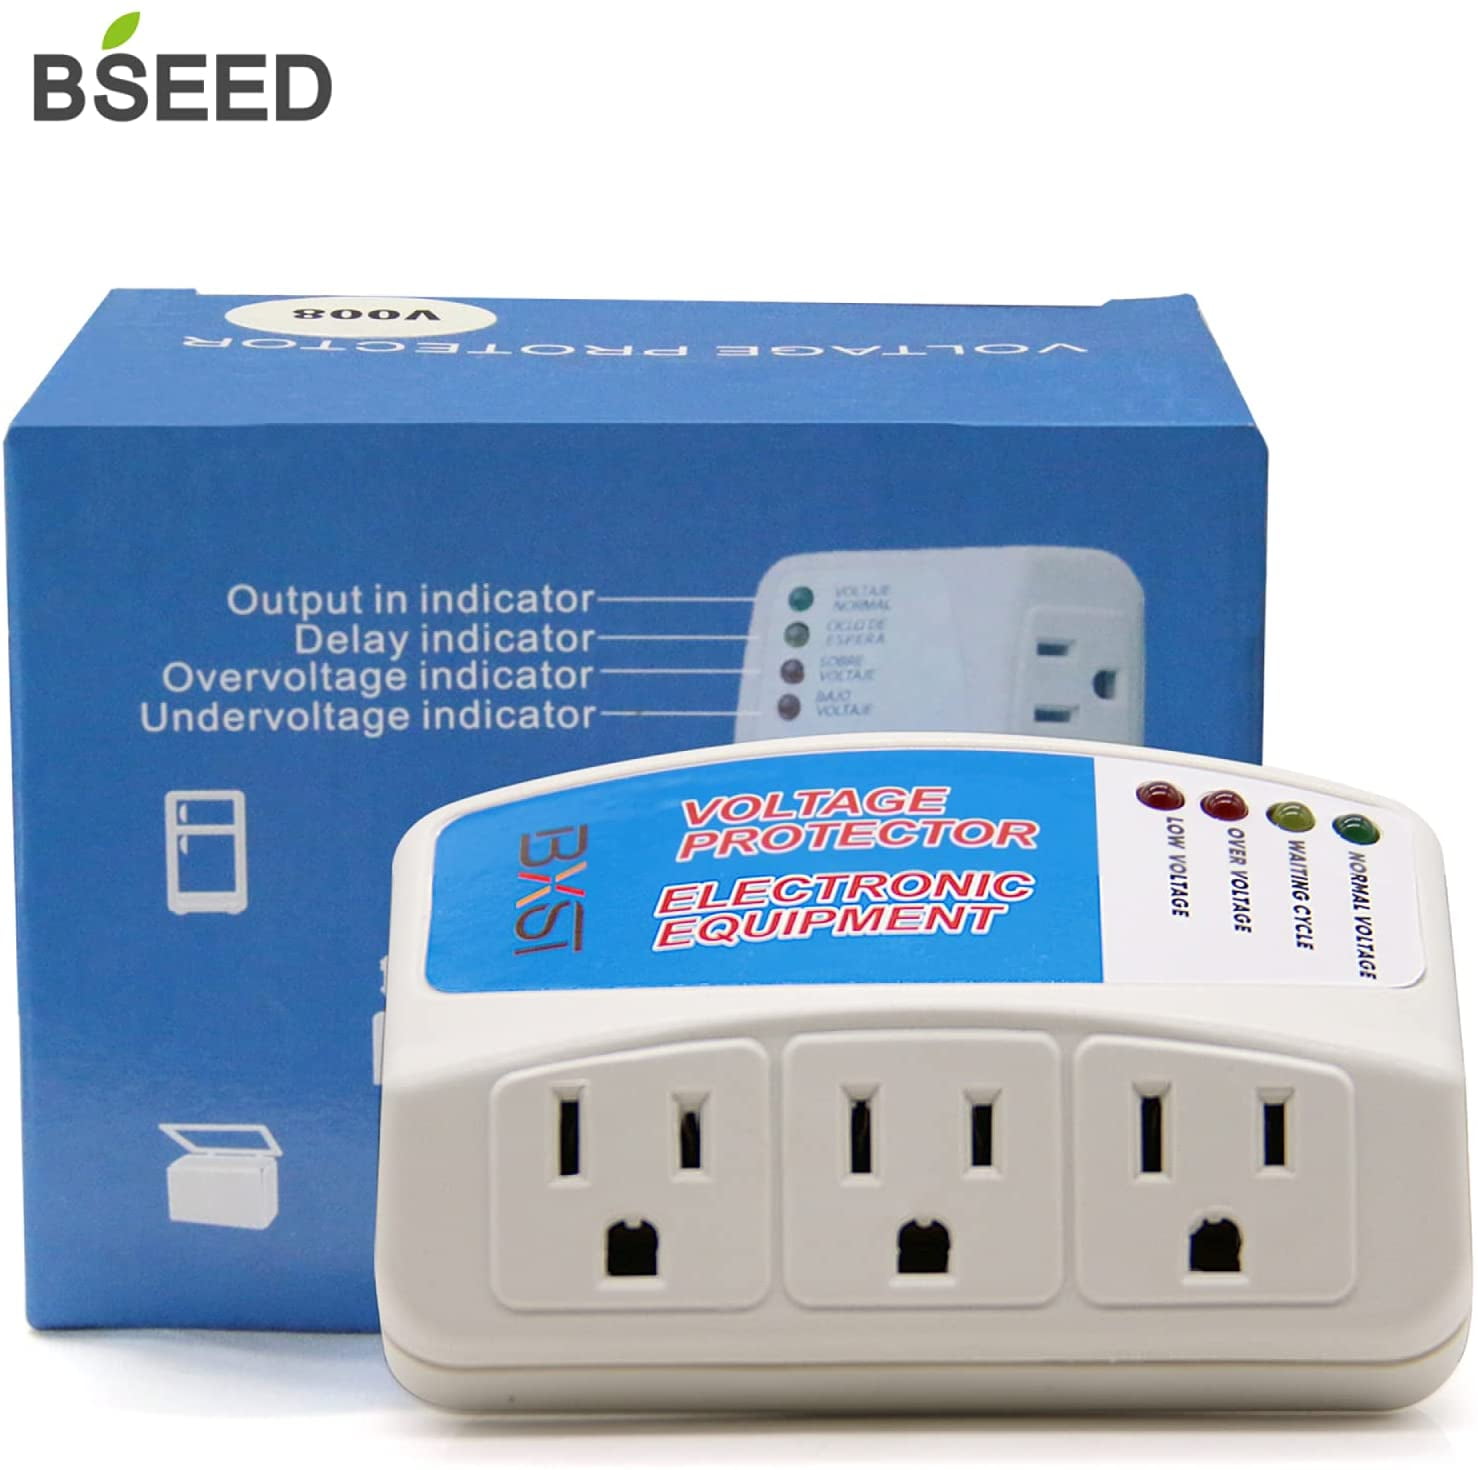 1 BSEED Voltage Protector, Single Outlet Surge Protector Plug in for  Various Home Appliance Multi-Function Plug with Protection Wa